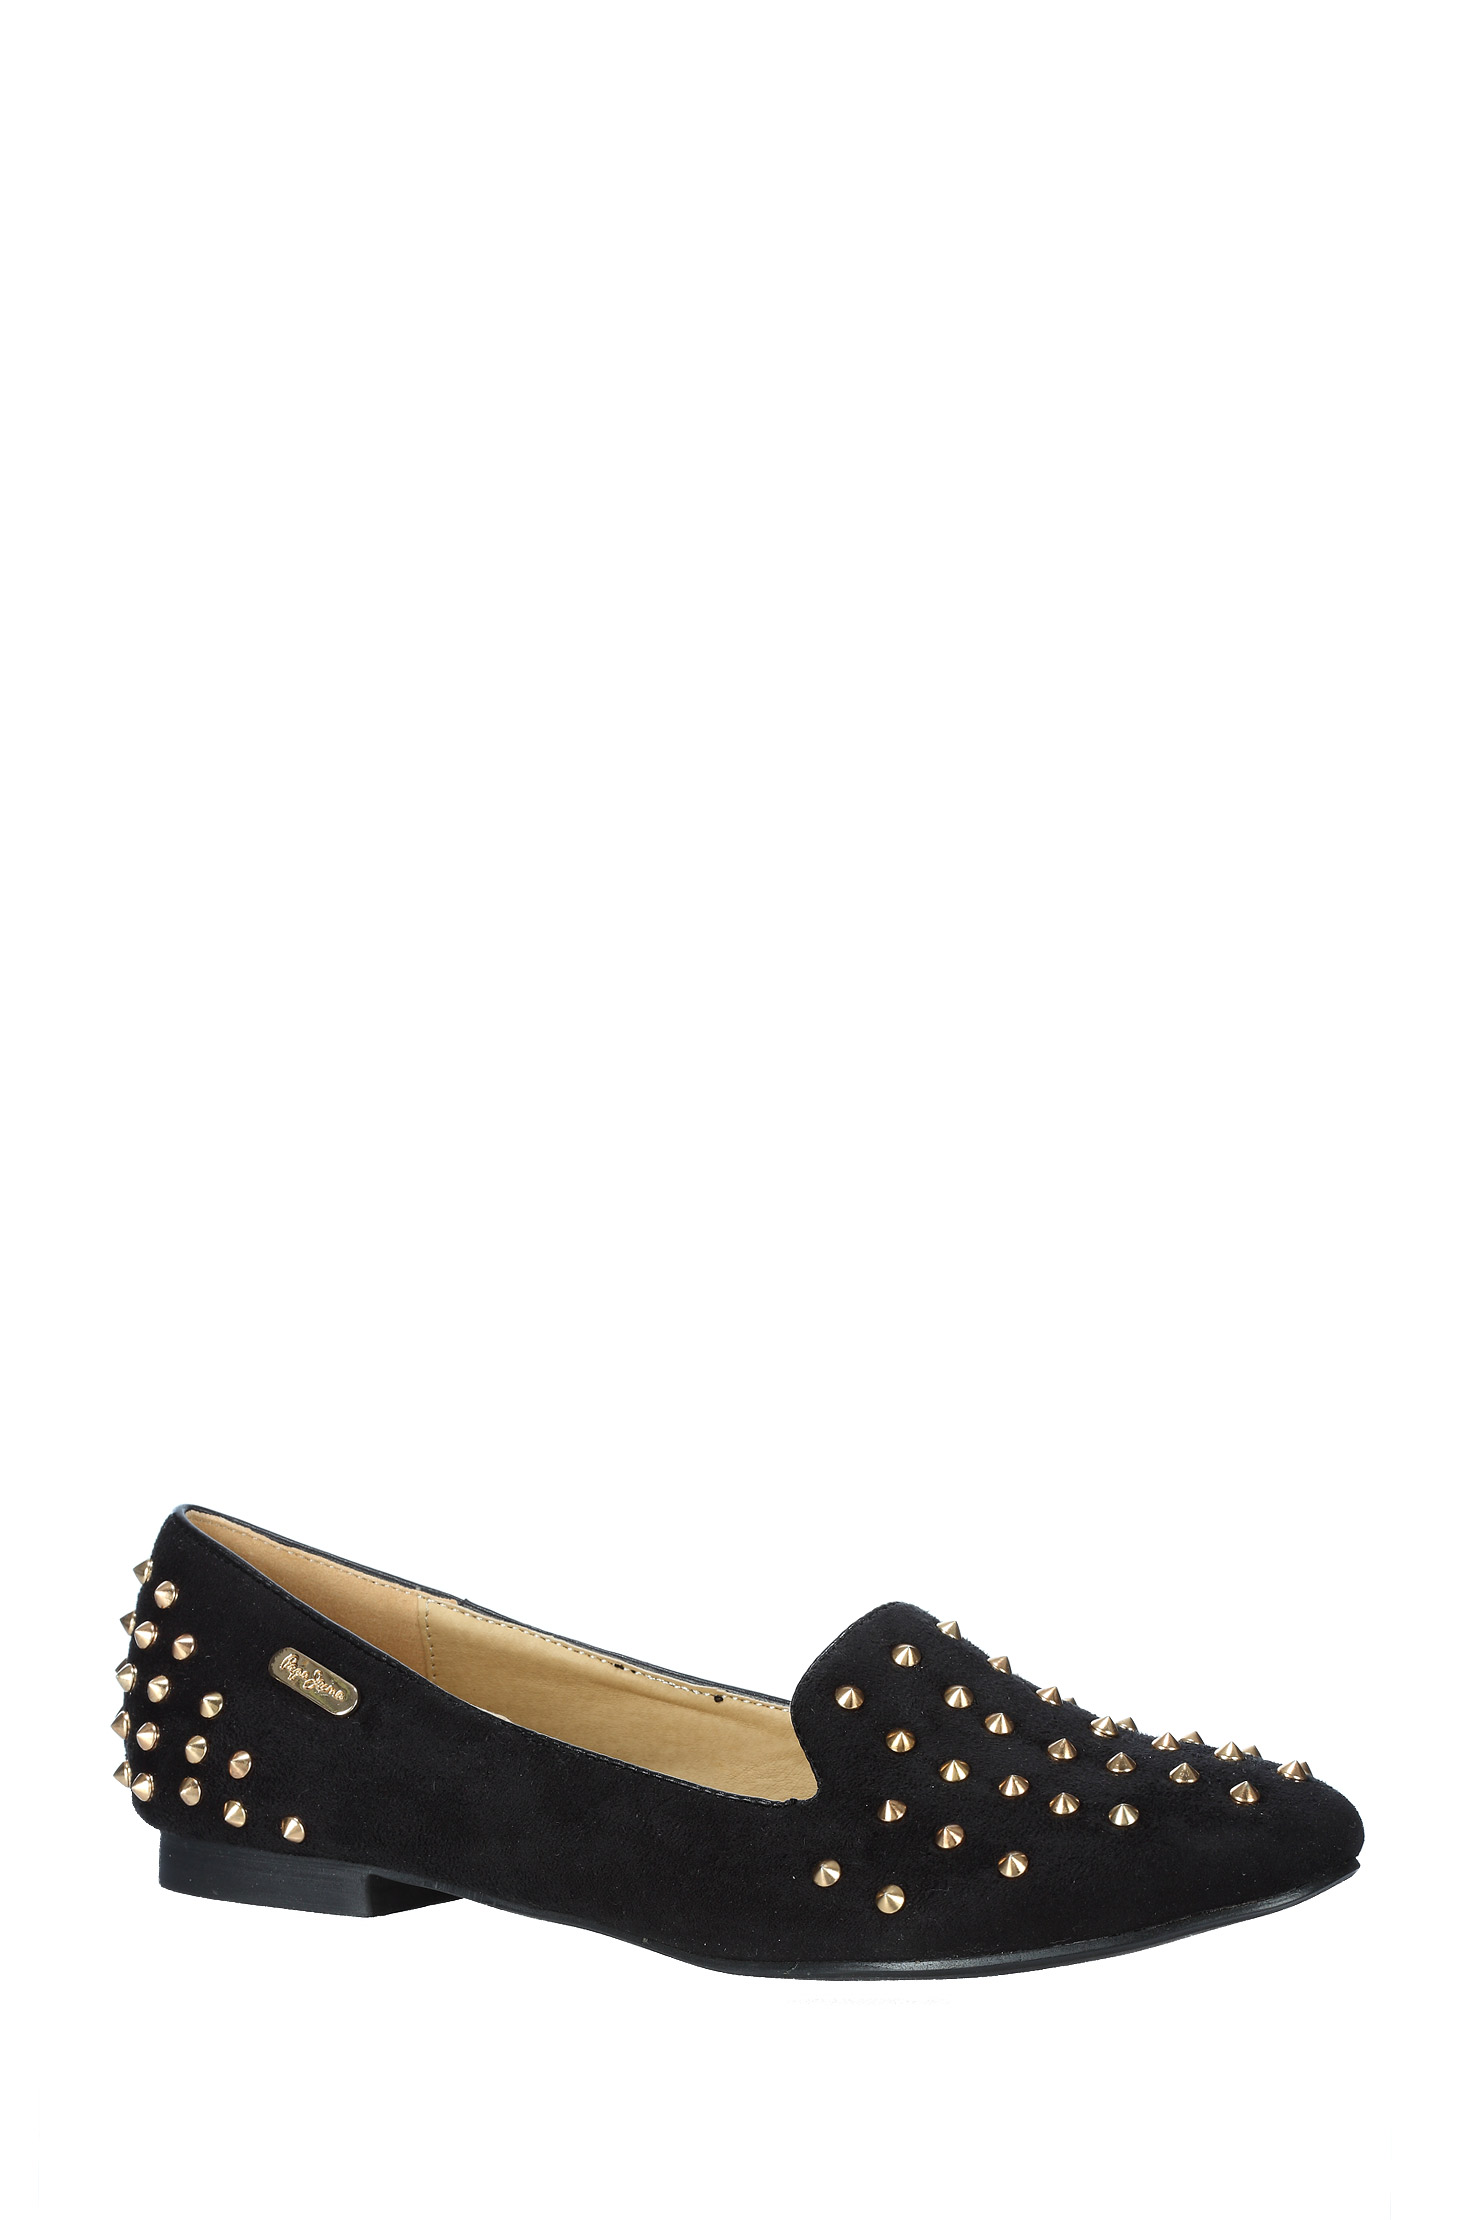 Pepe Jeans Slippers Moccasin Shoes in Black | Lyst